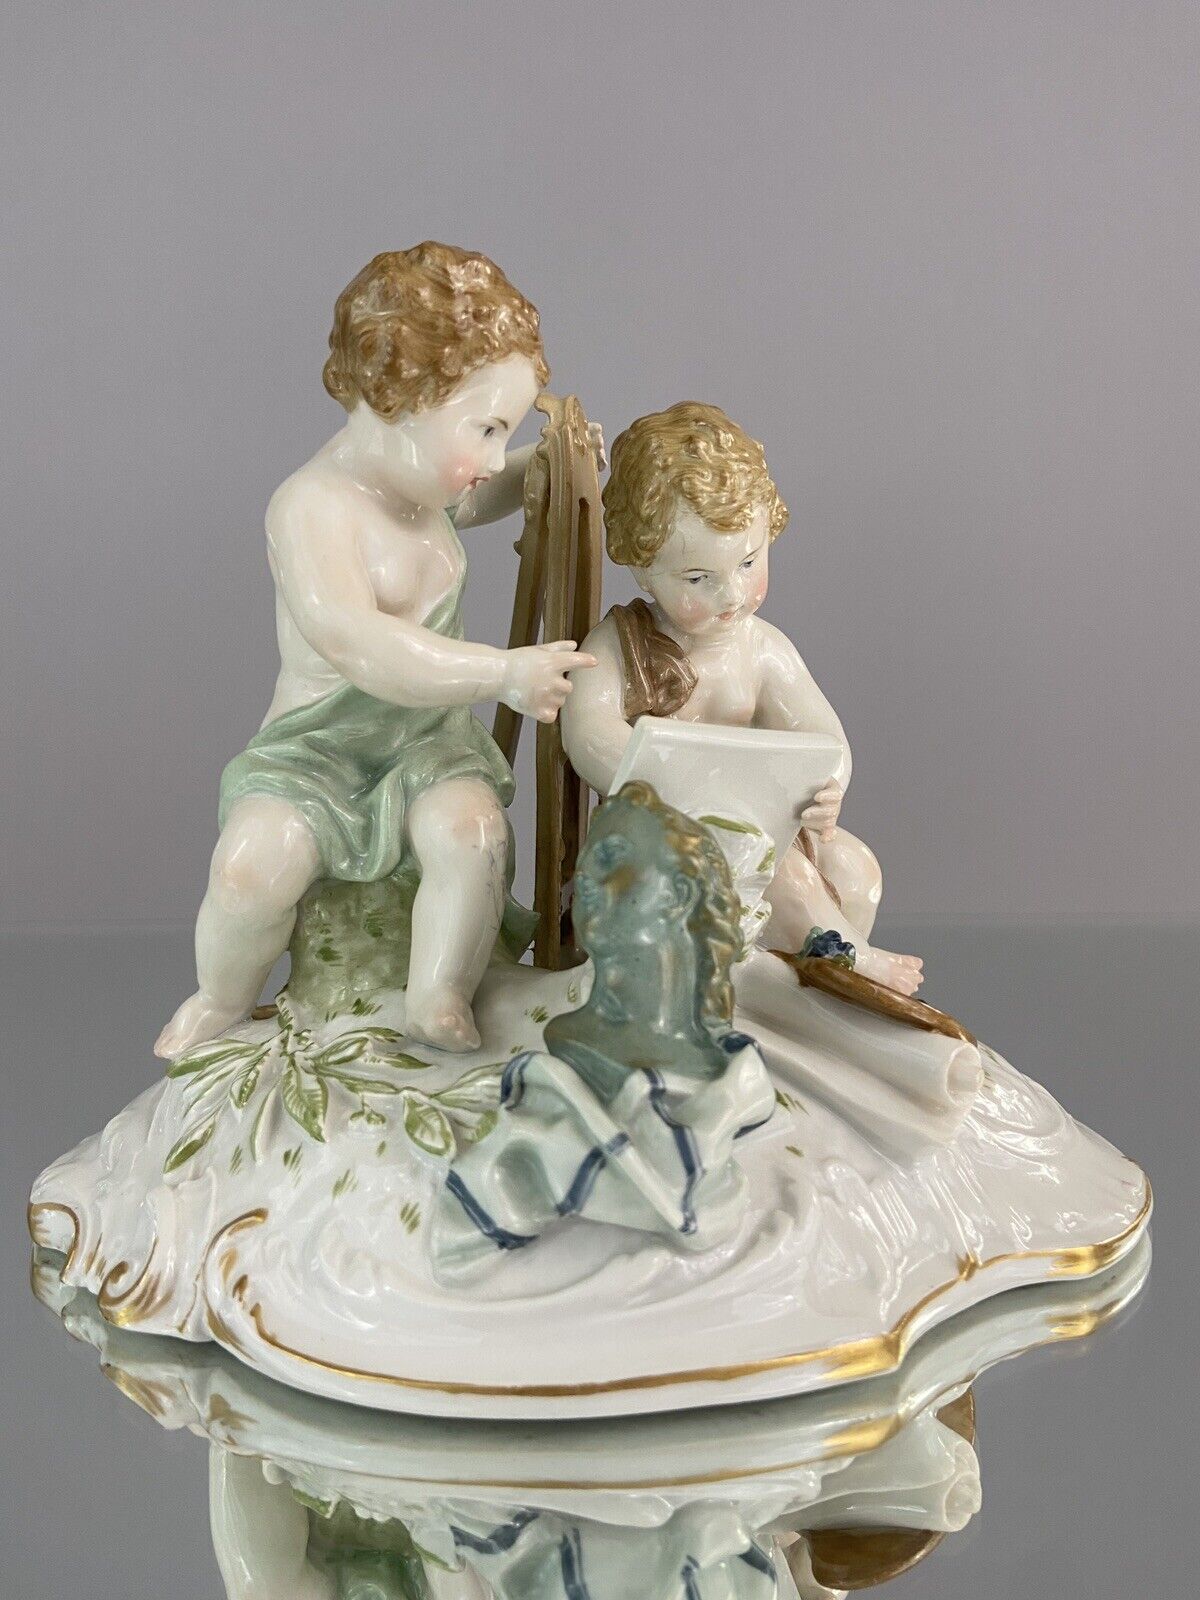 Antique Kpm figurine depicting cherubs with easel & painting subject. Meissen